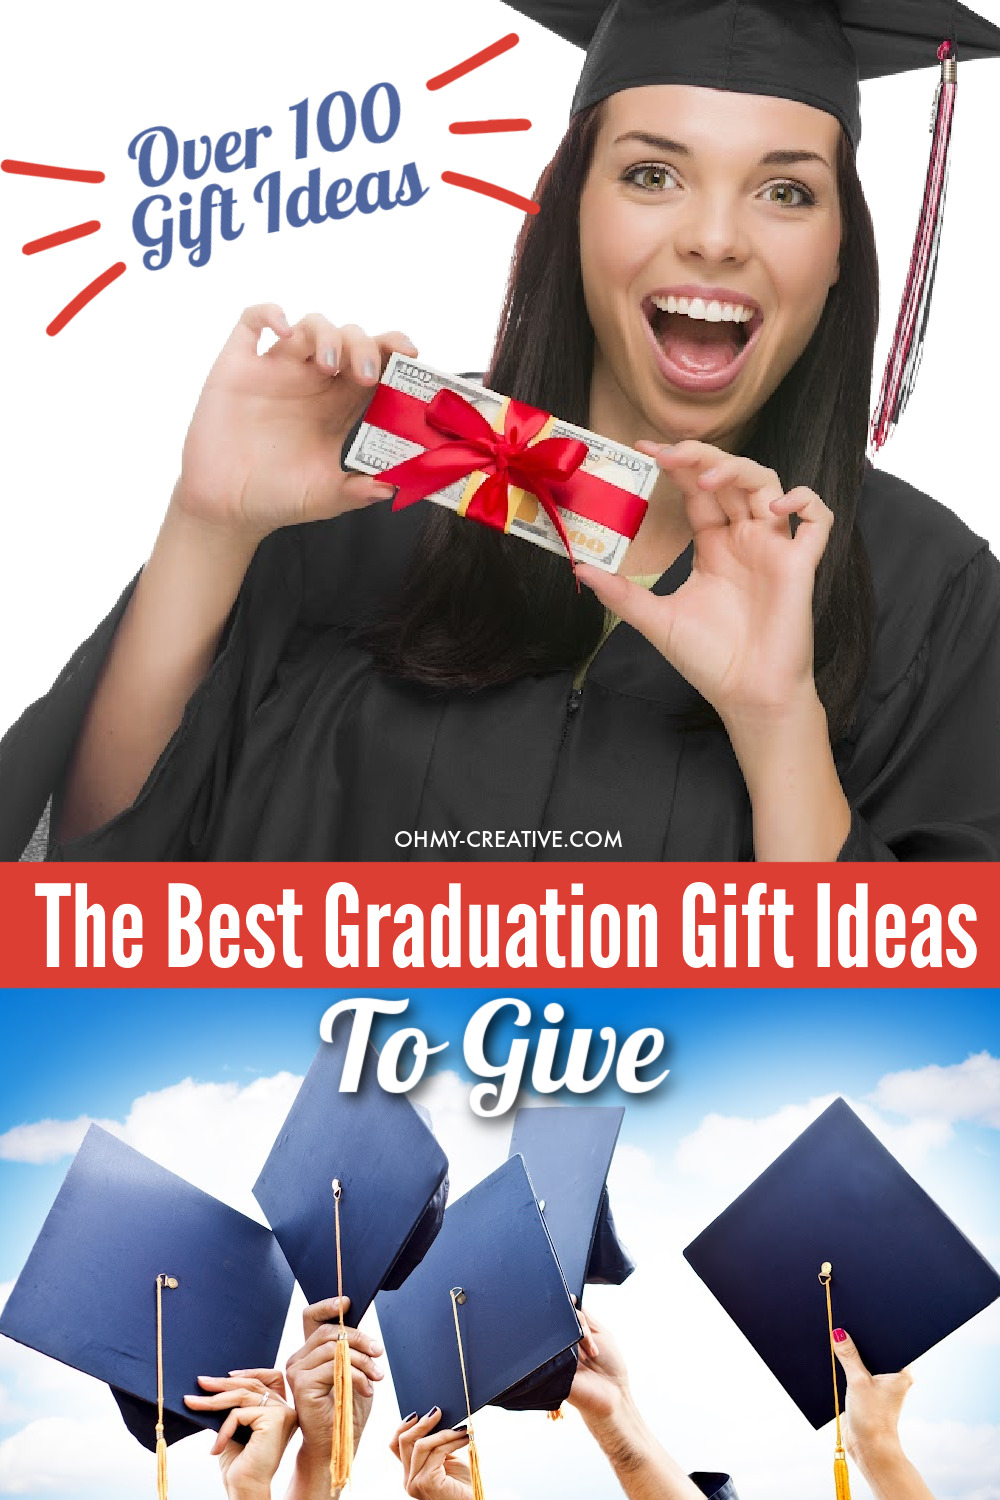 Over 100 graduation gift ideas to give the graduate. One girl holding a wrapped graduation gift and a group of graduation caps are held in the air celebrating.